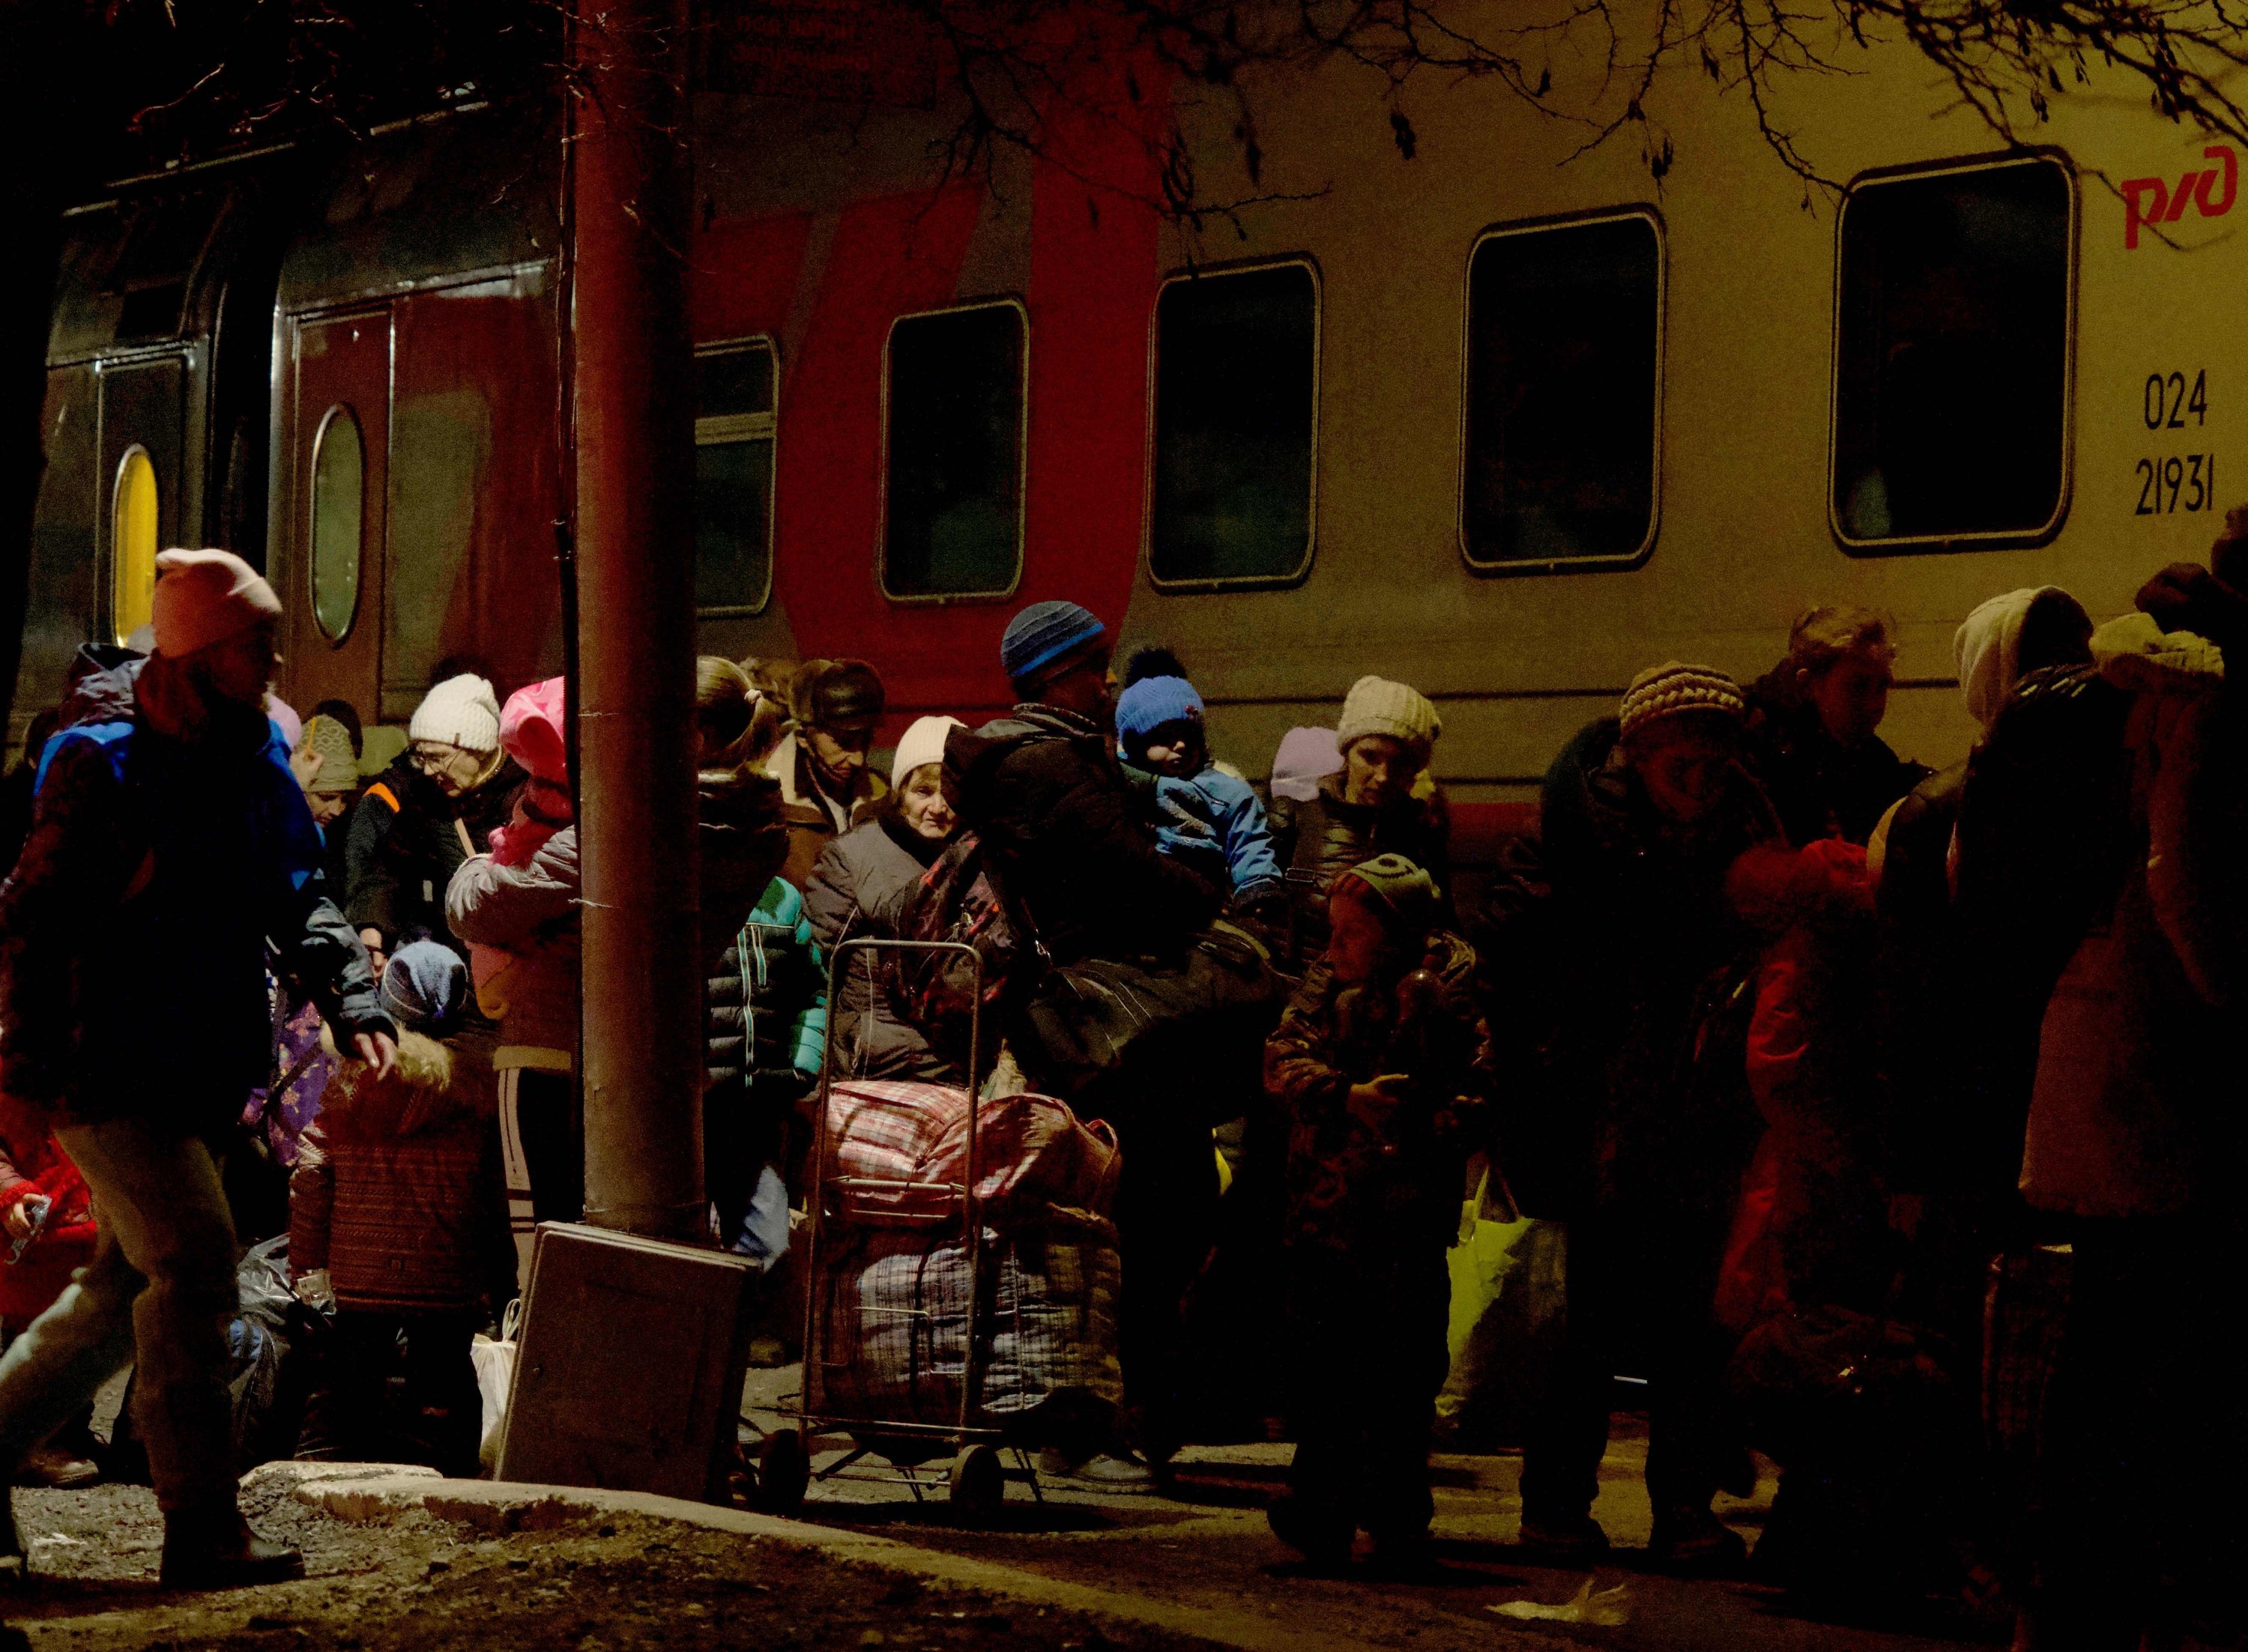 People evacuated from the self-proclaimed Donetsk People's Republic queue outside a train before their evacuation deep into Russia, in the town of Taganrog, Feb. 20, 2022. (AFP Photo)